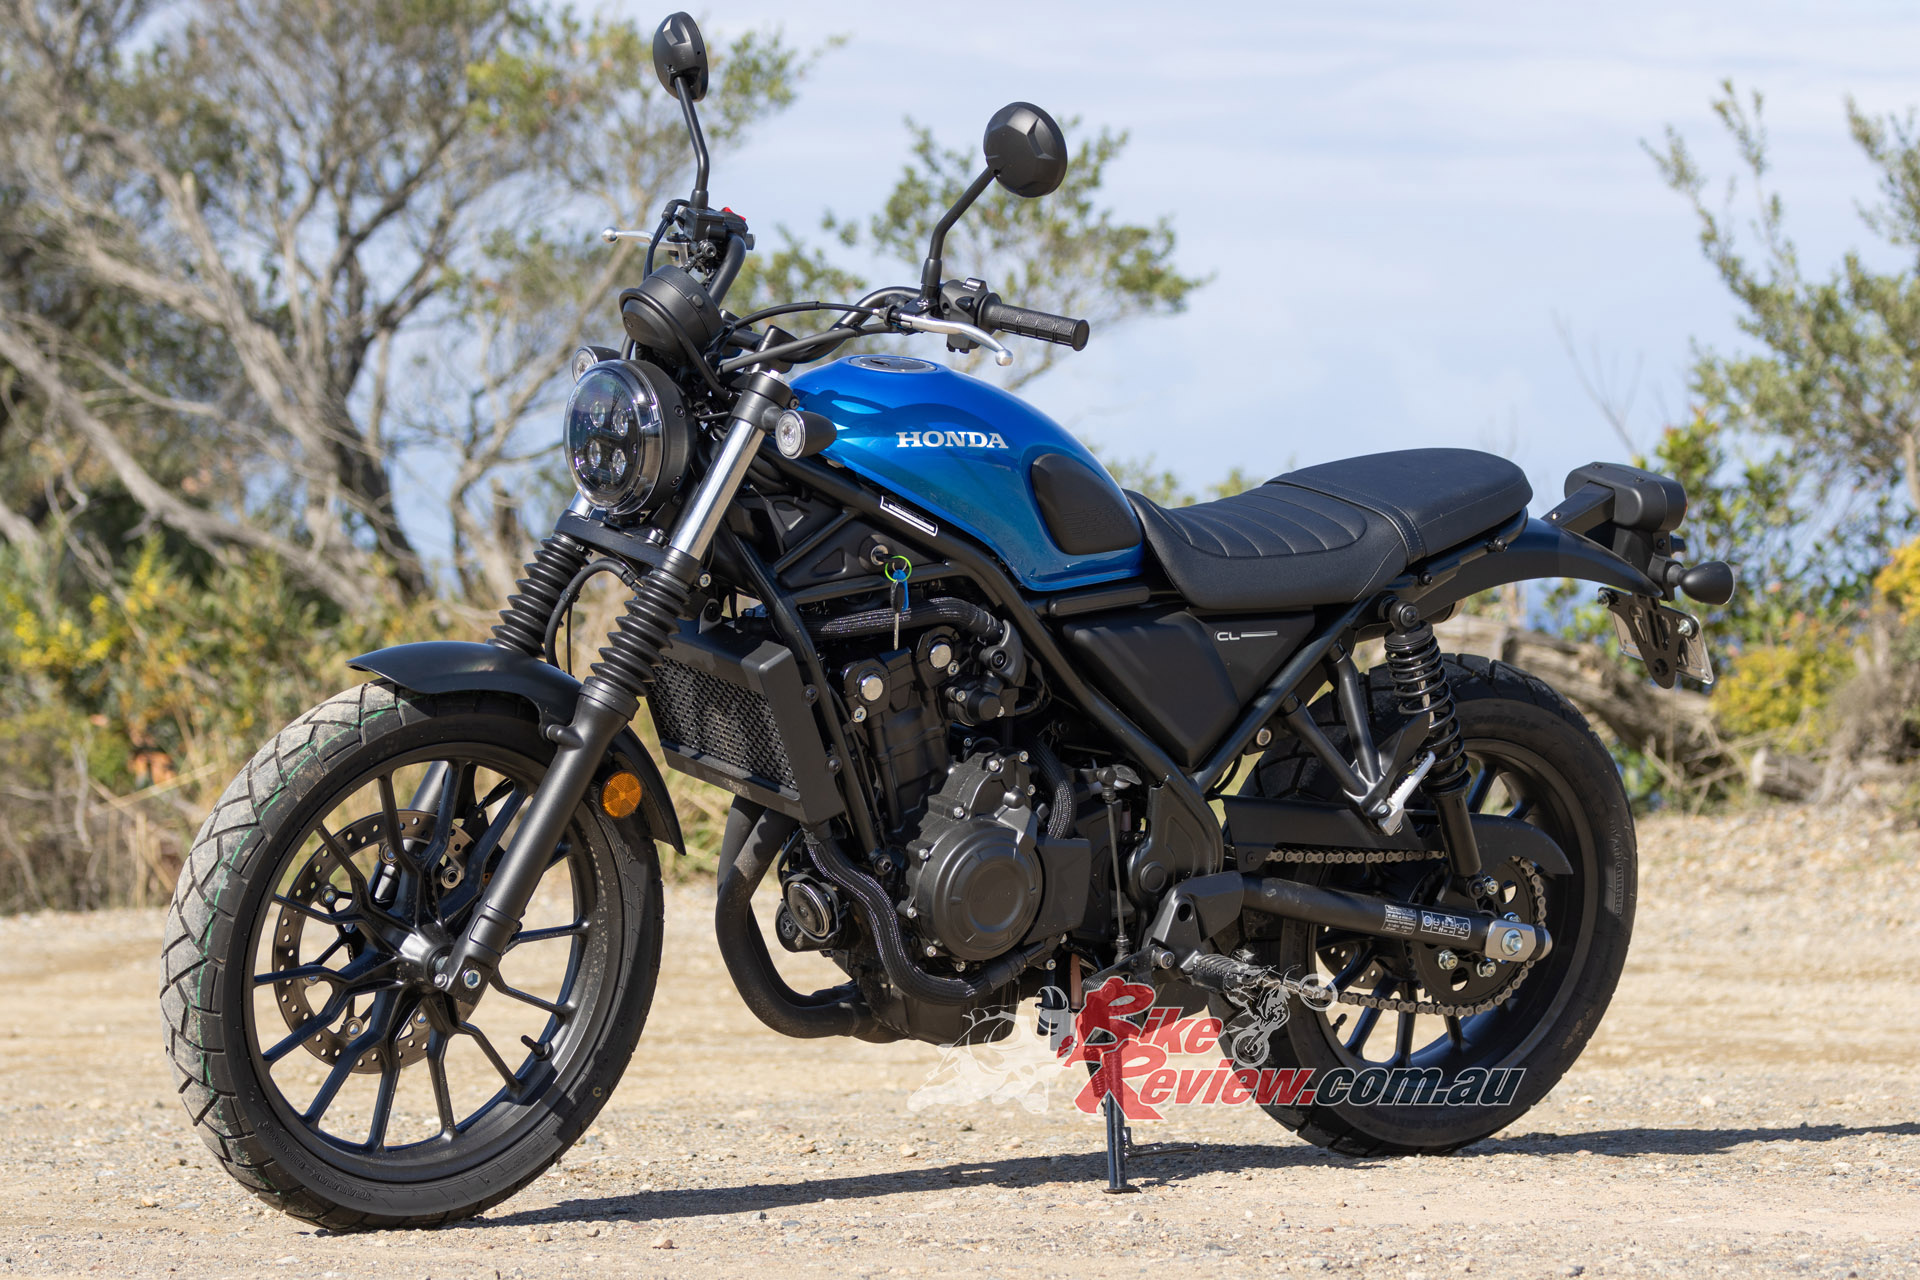 "Styling-wise – it looks damn cool, I won't lie. Regardless of the exhaust, the blacked-out powertrain frame complements the minimal styling and retro-style dash gauges with a side ignition barrel."